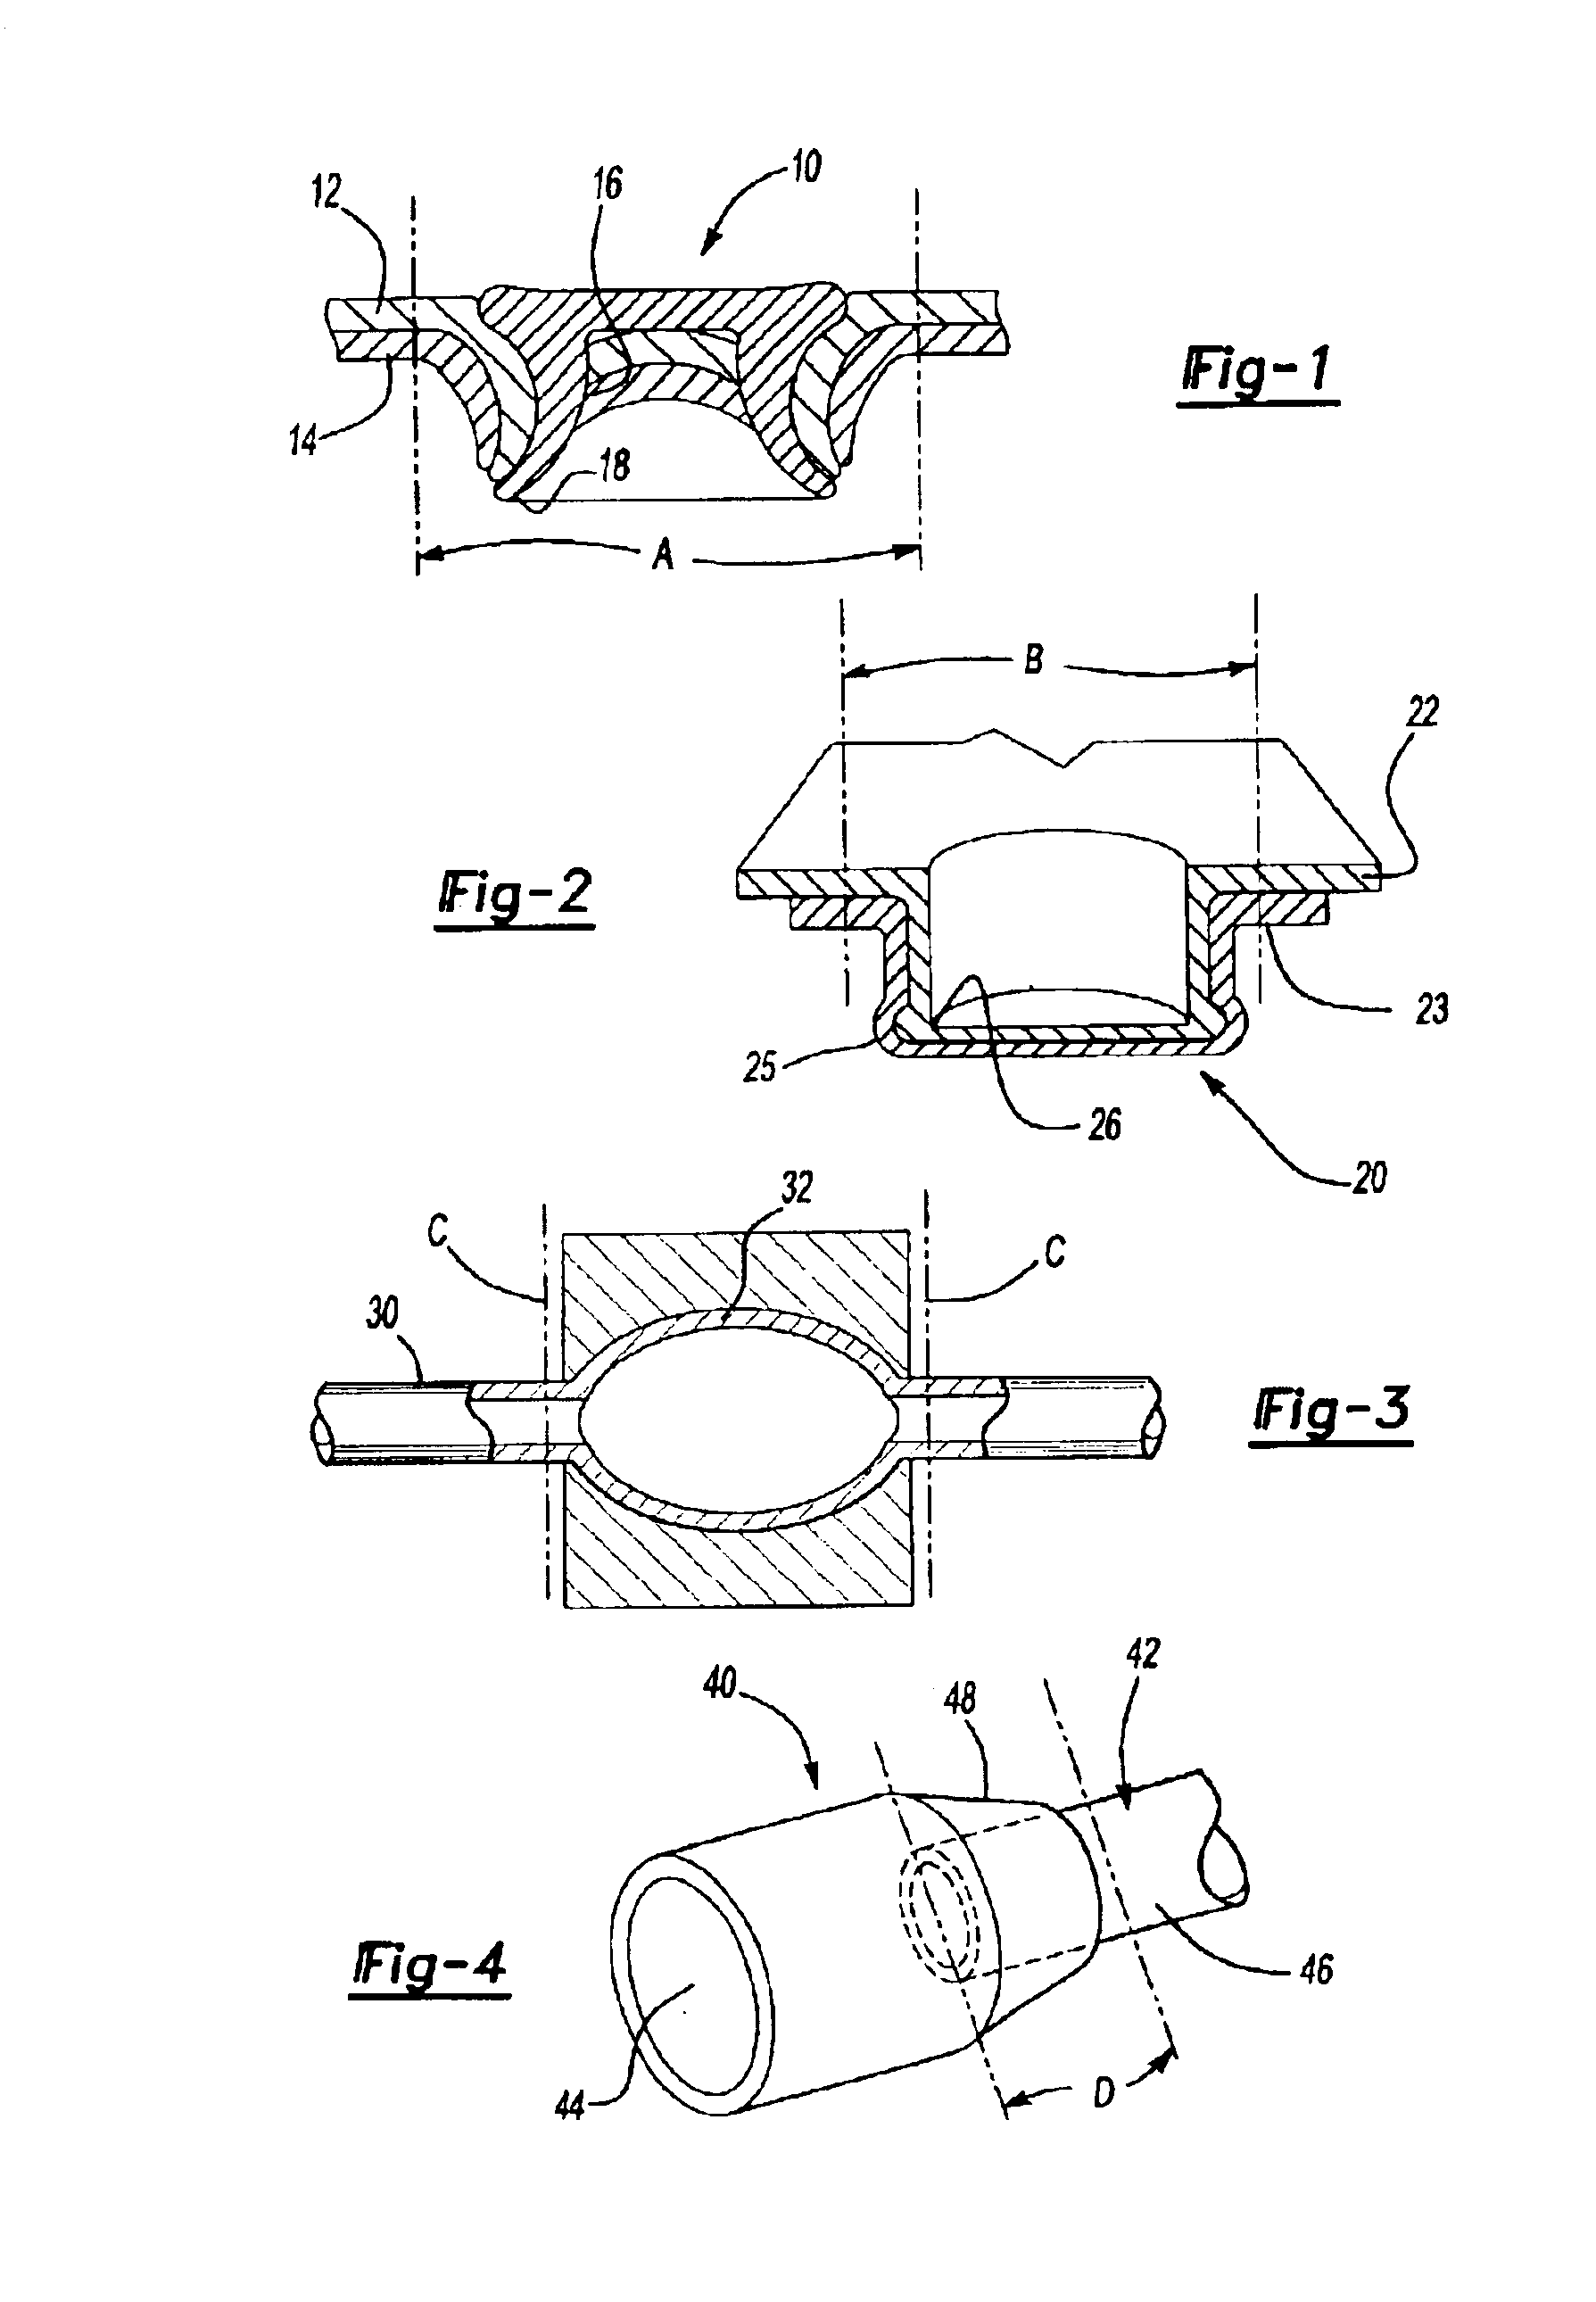 Method of locally heating a part to reduce strength and increase ductility for subsequent manufacturing operation